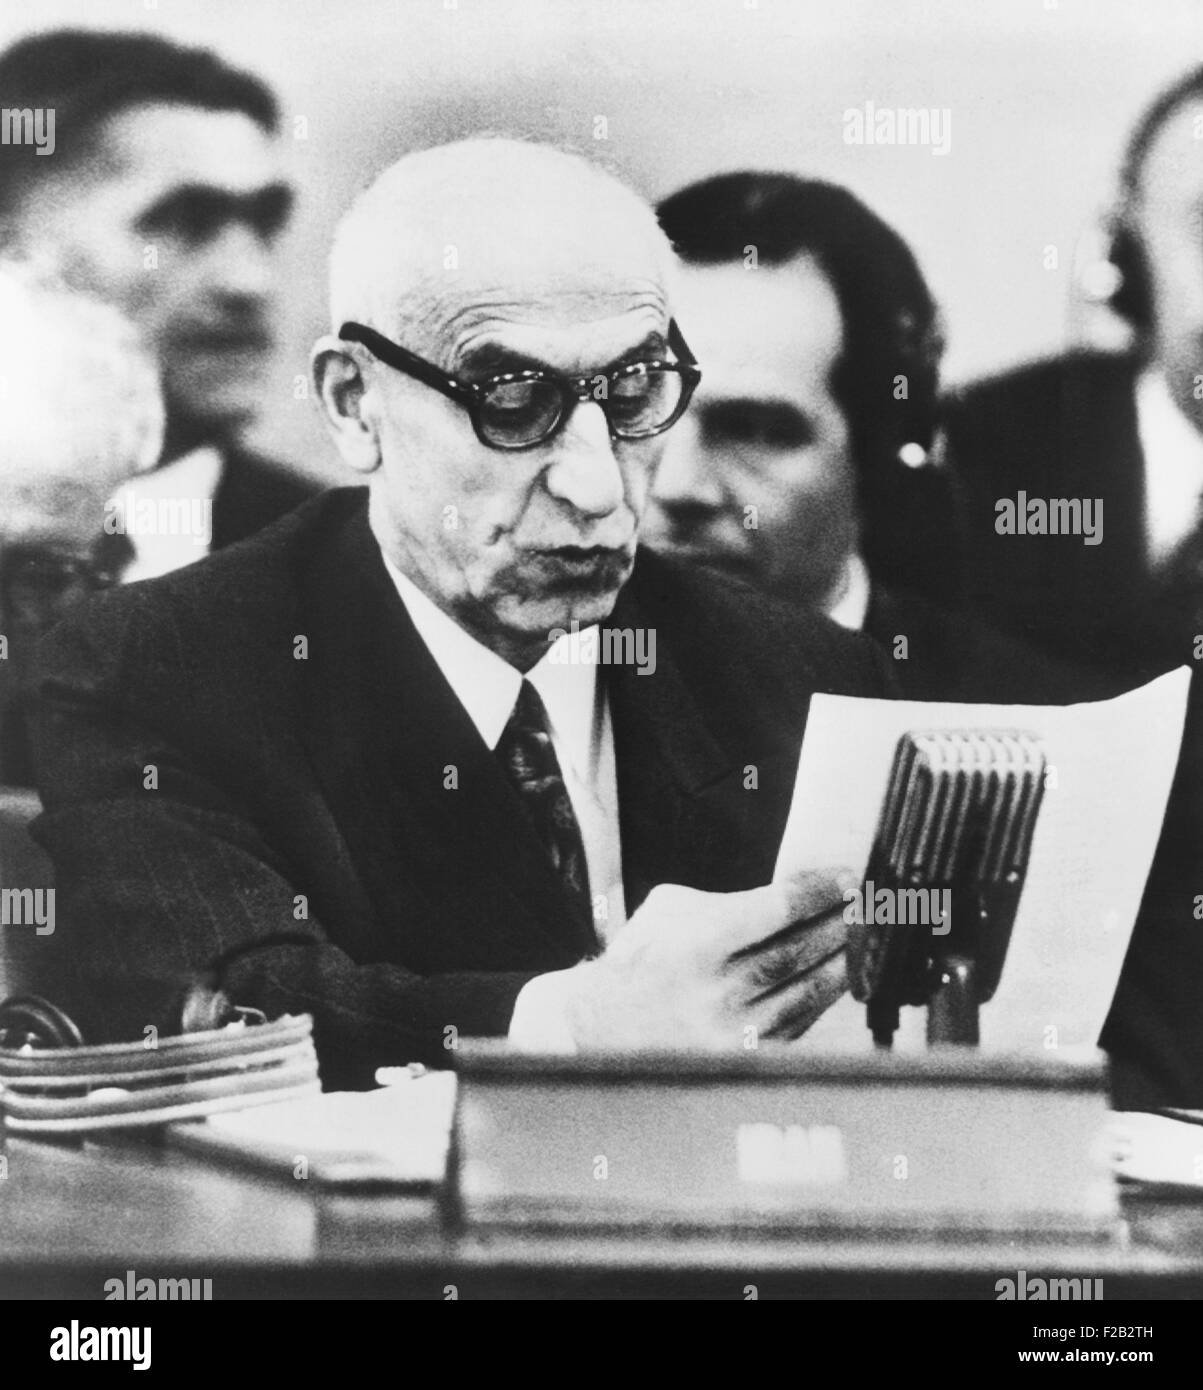 Iranian premier Mohammed Mossadegh appearing before the UN Security Council. Oct. 16, 1951. He threatened to return to Iran unless Britain acknowledged Iran's right to nationalize the Anglo Iranian Oil Company. (CSU 2015 8 506) Stock Photo